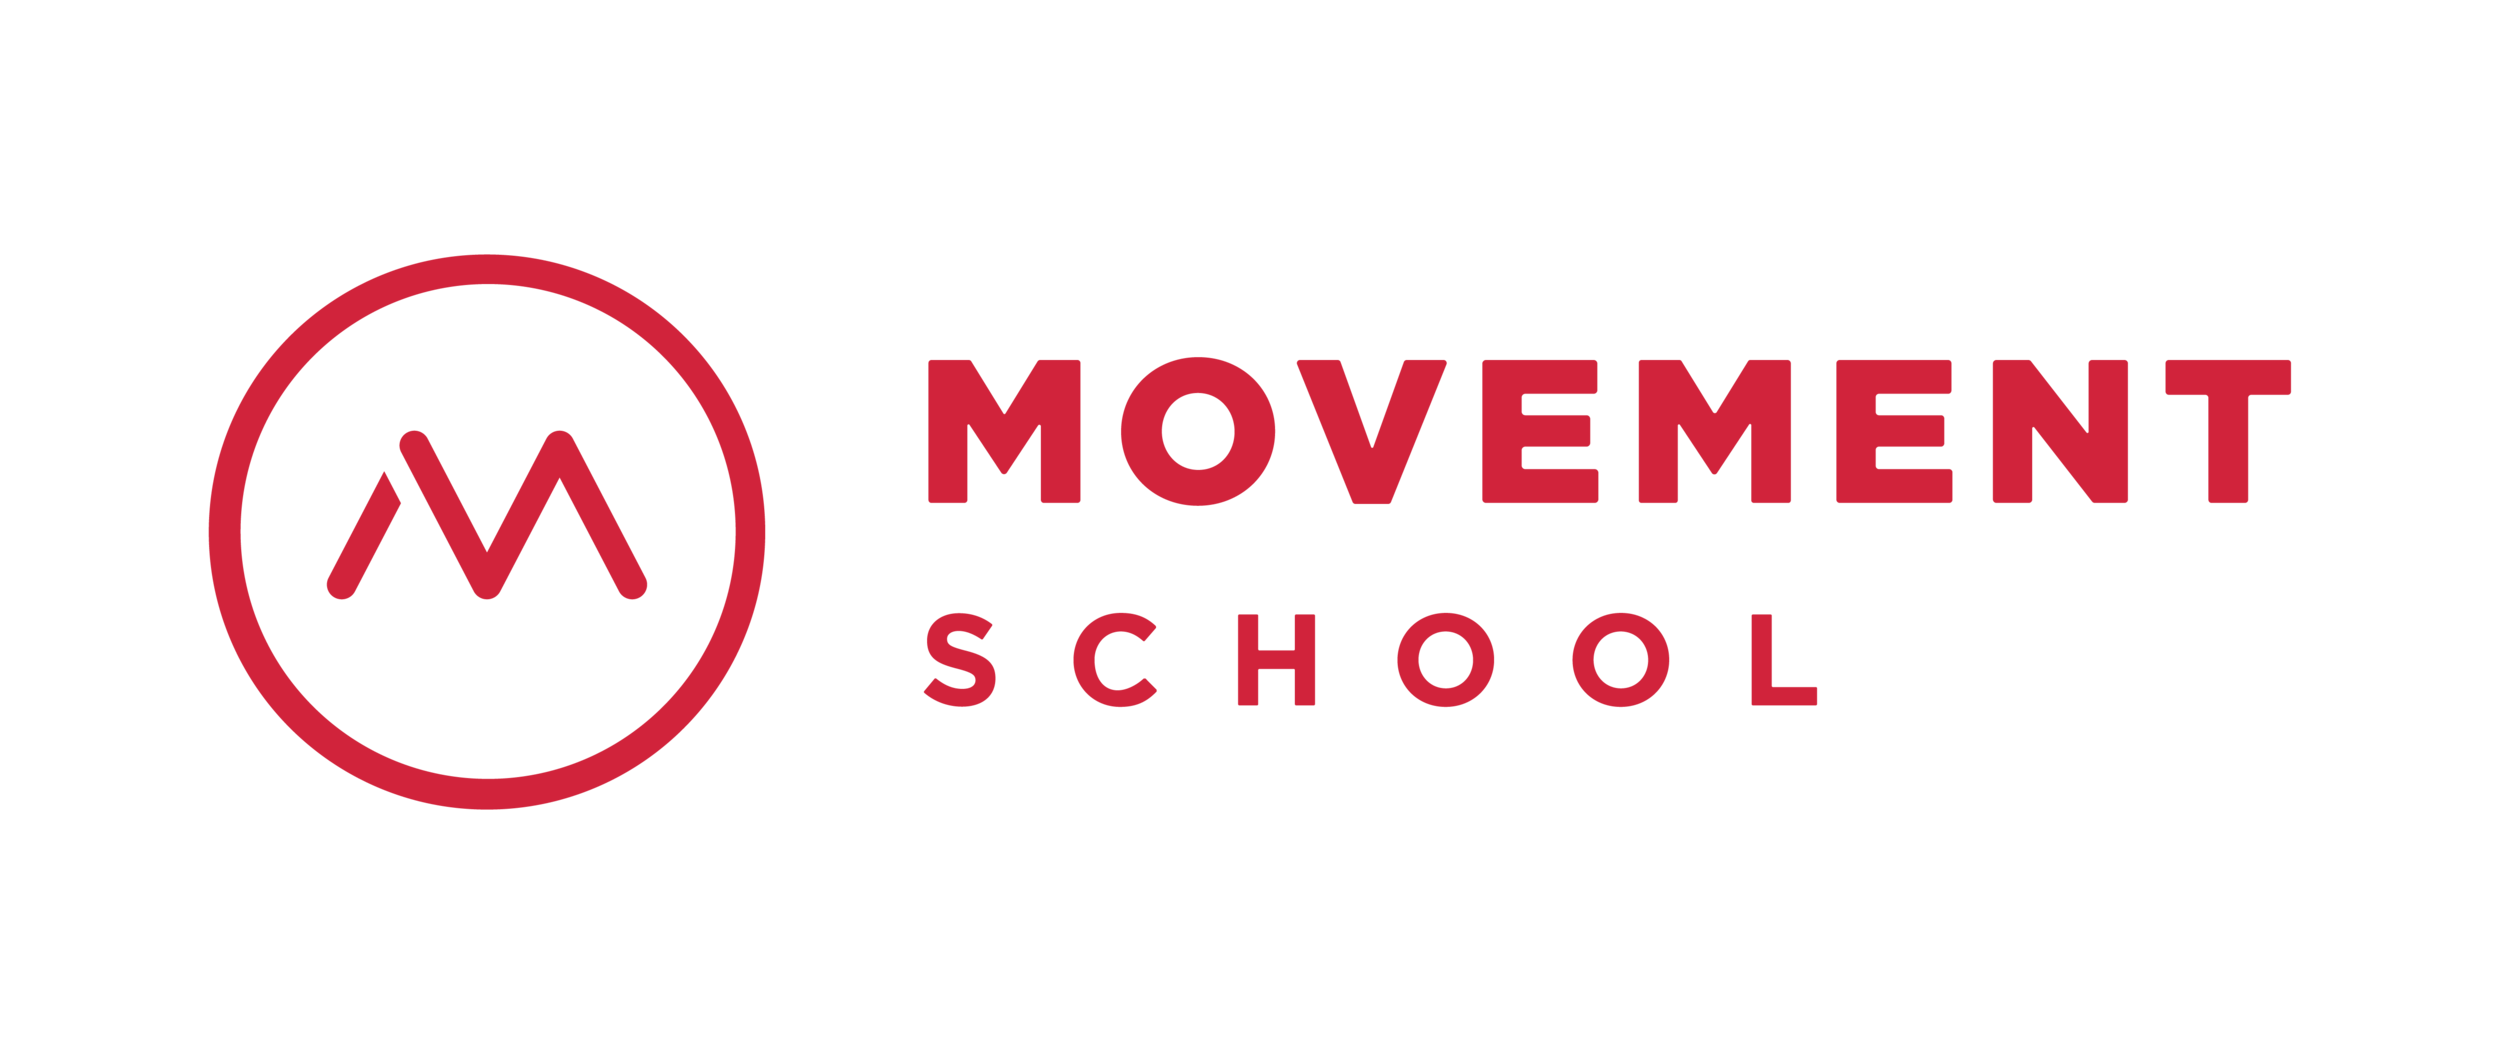 MovementSchool-Identity-Main-Red.png